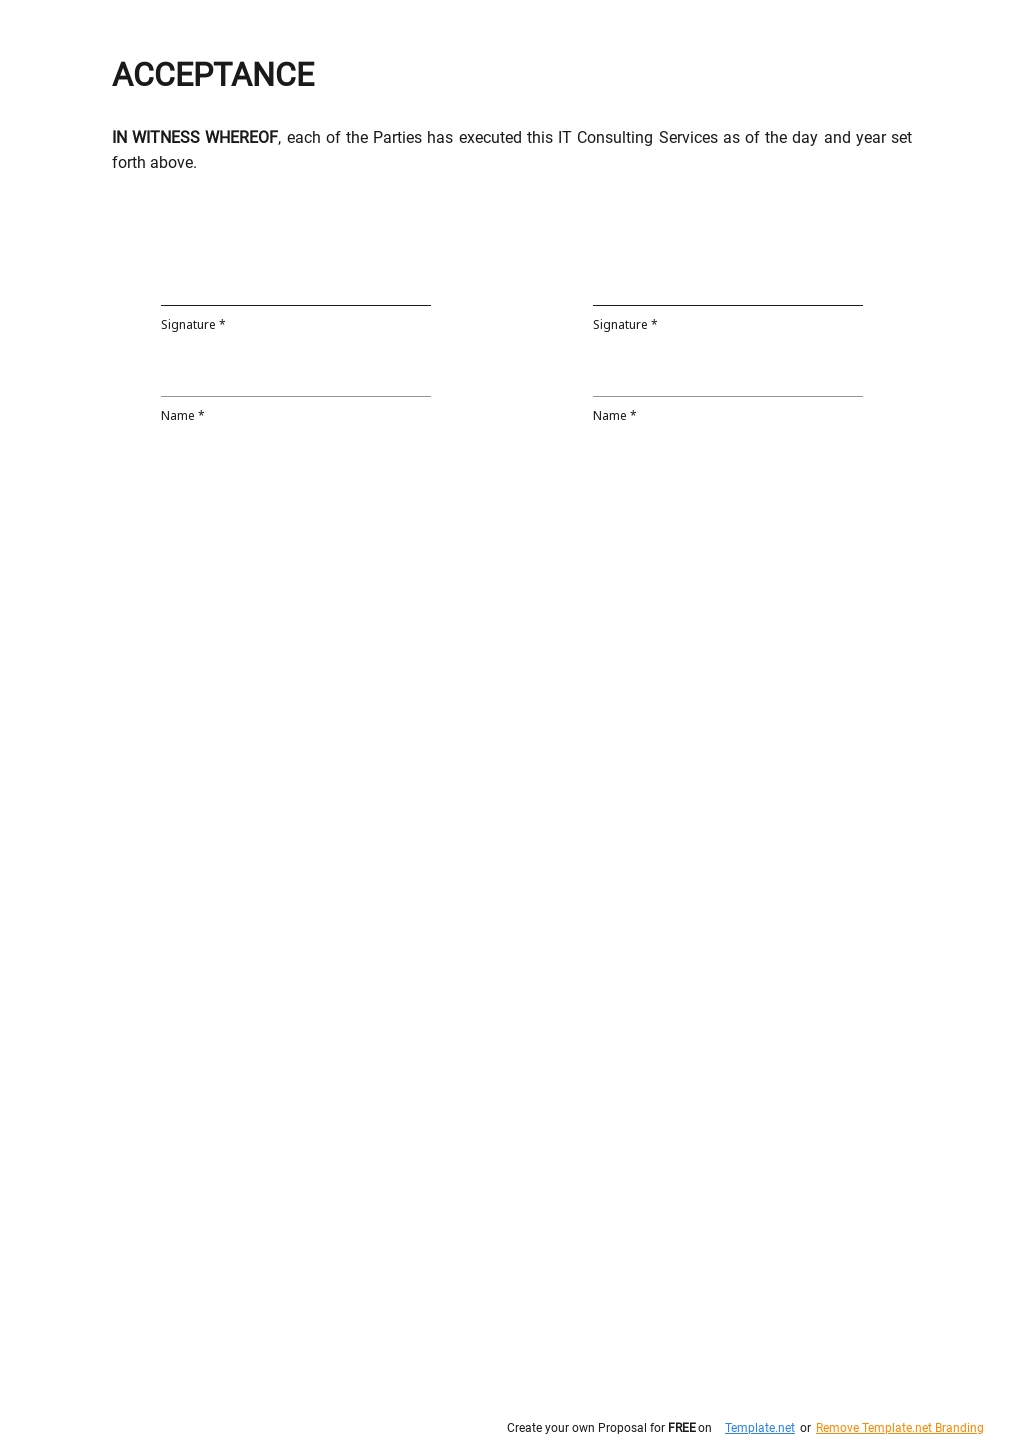 IT Consulting Services Agreement Template 2.jpe